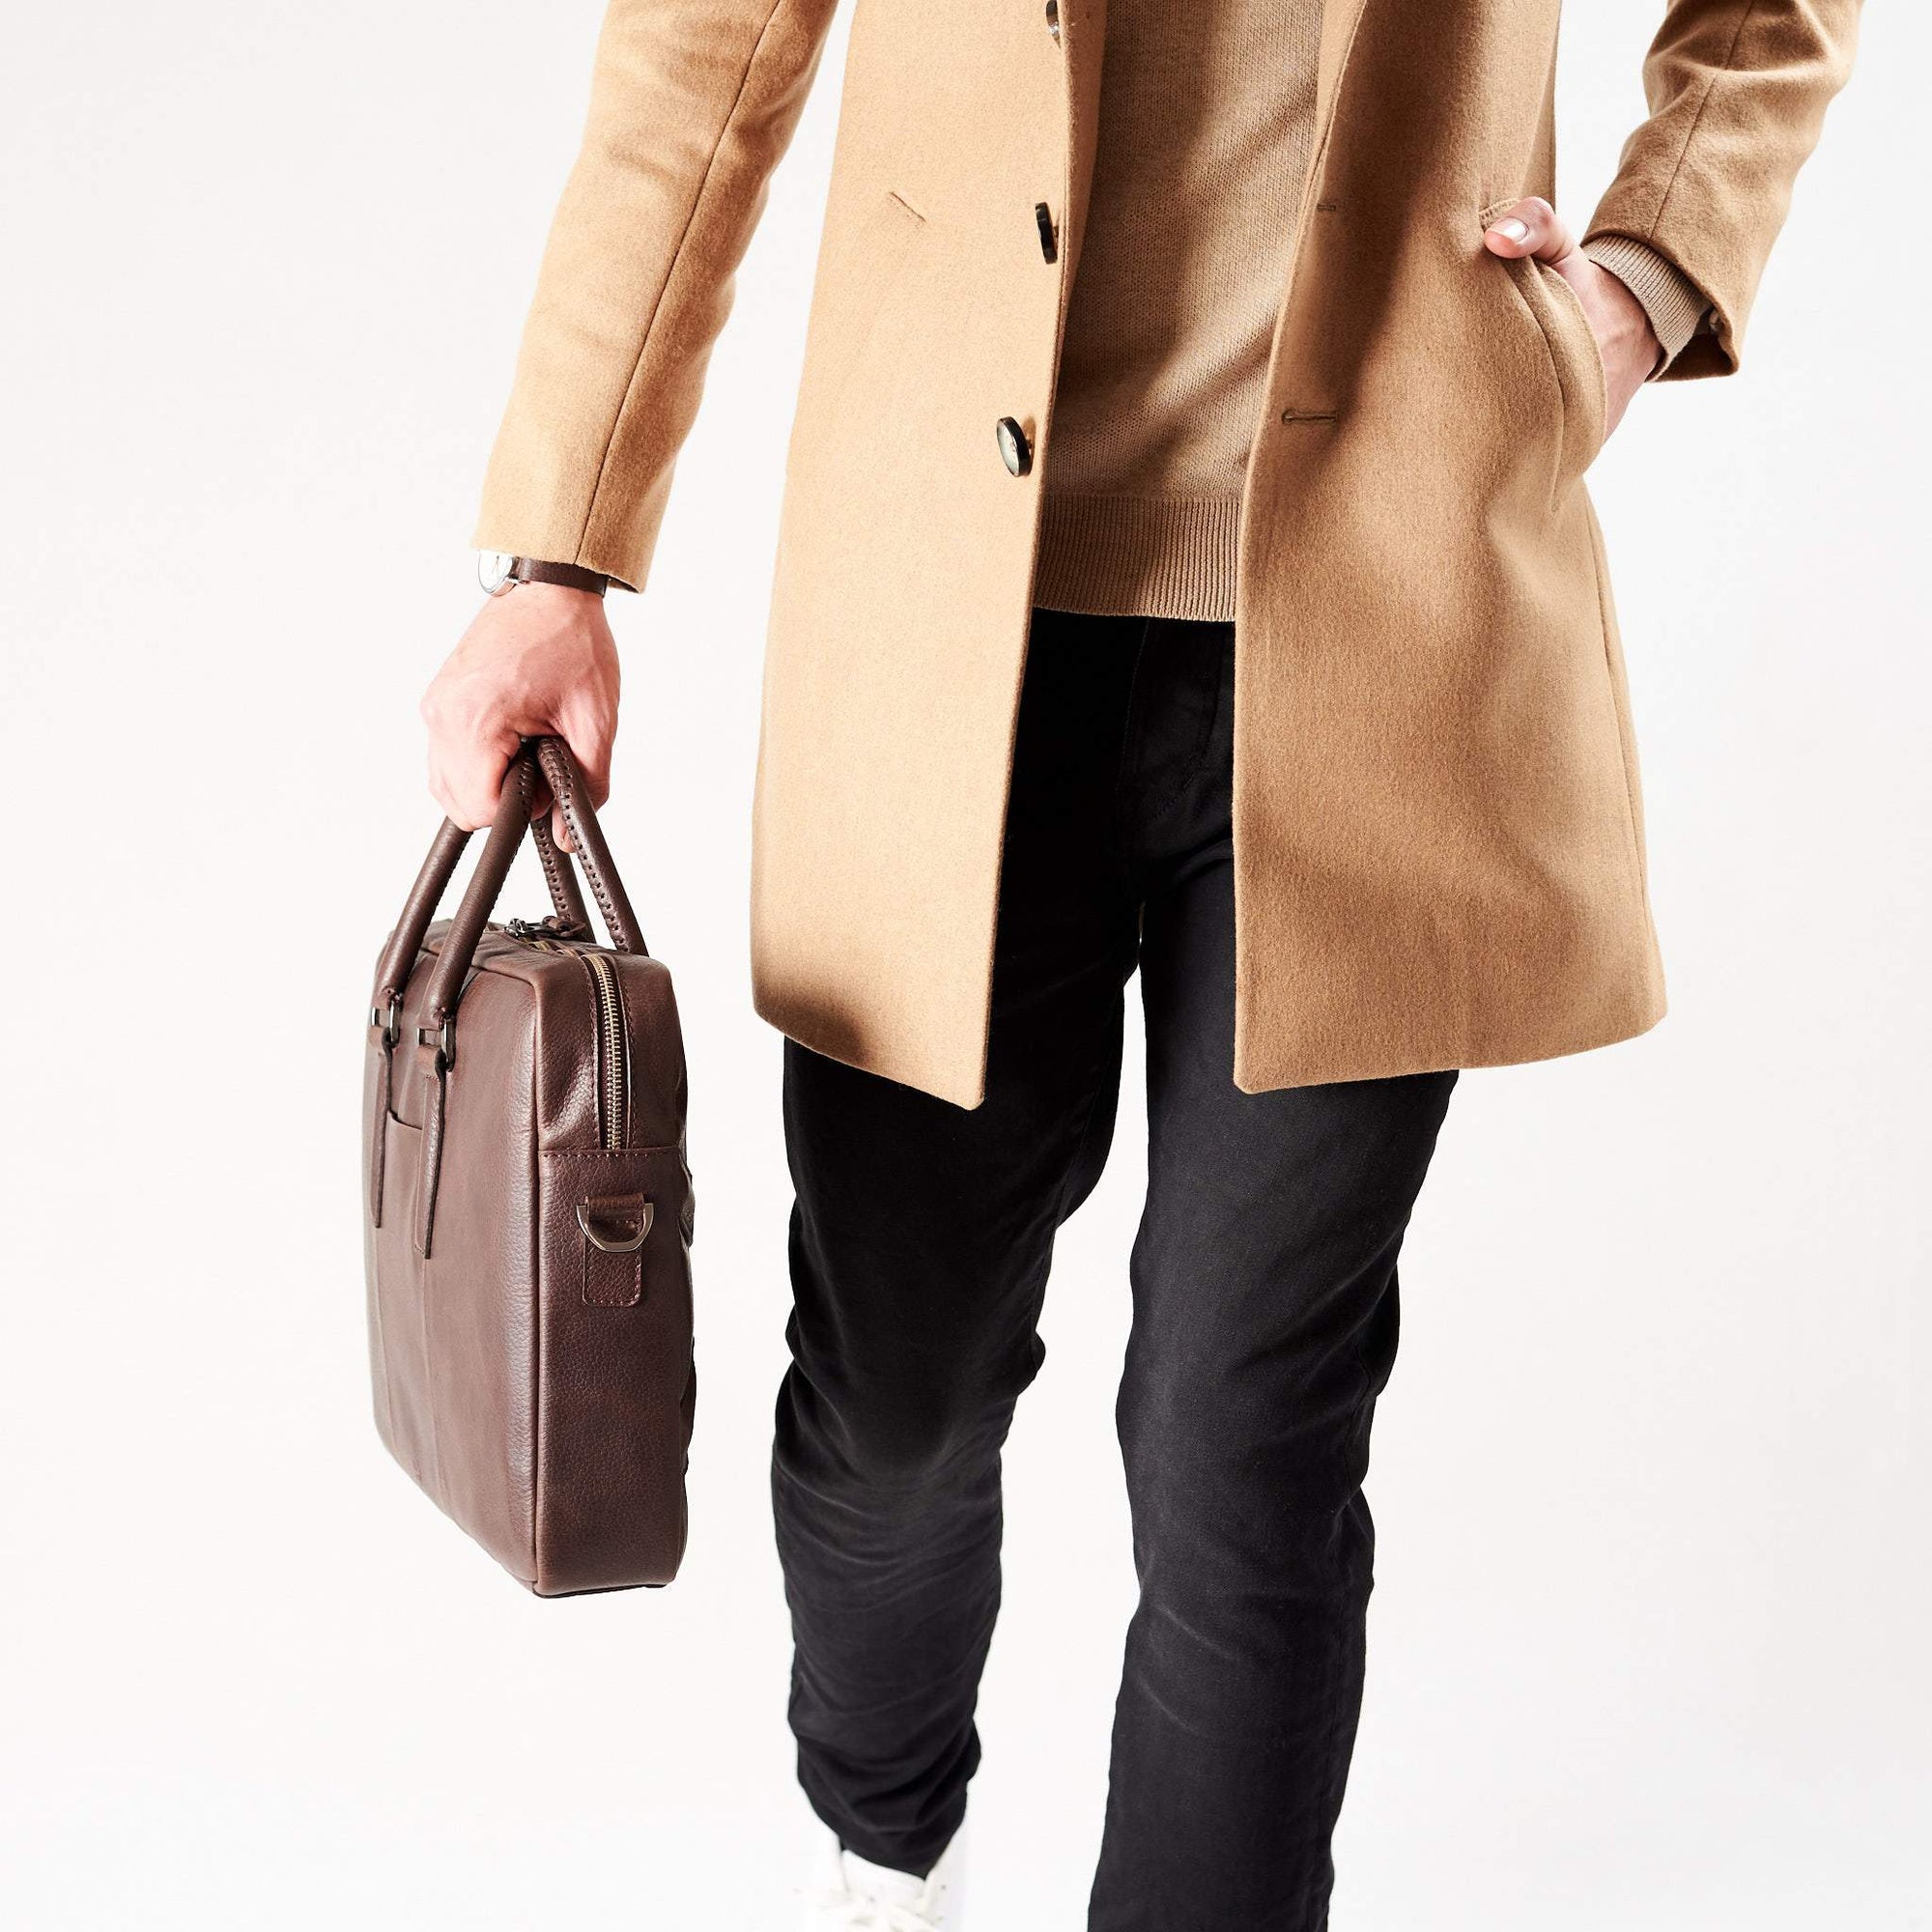 Style side view of model holding workbag. Dark Brown leather briefcase laptop bag for men. Gazeli laptop briefcase by Capra Leather.